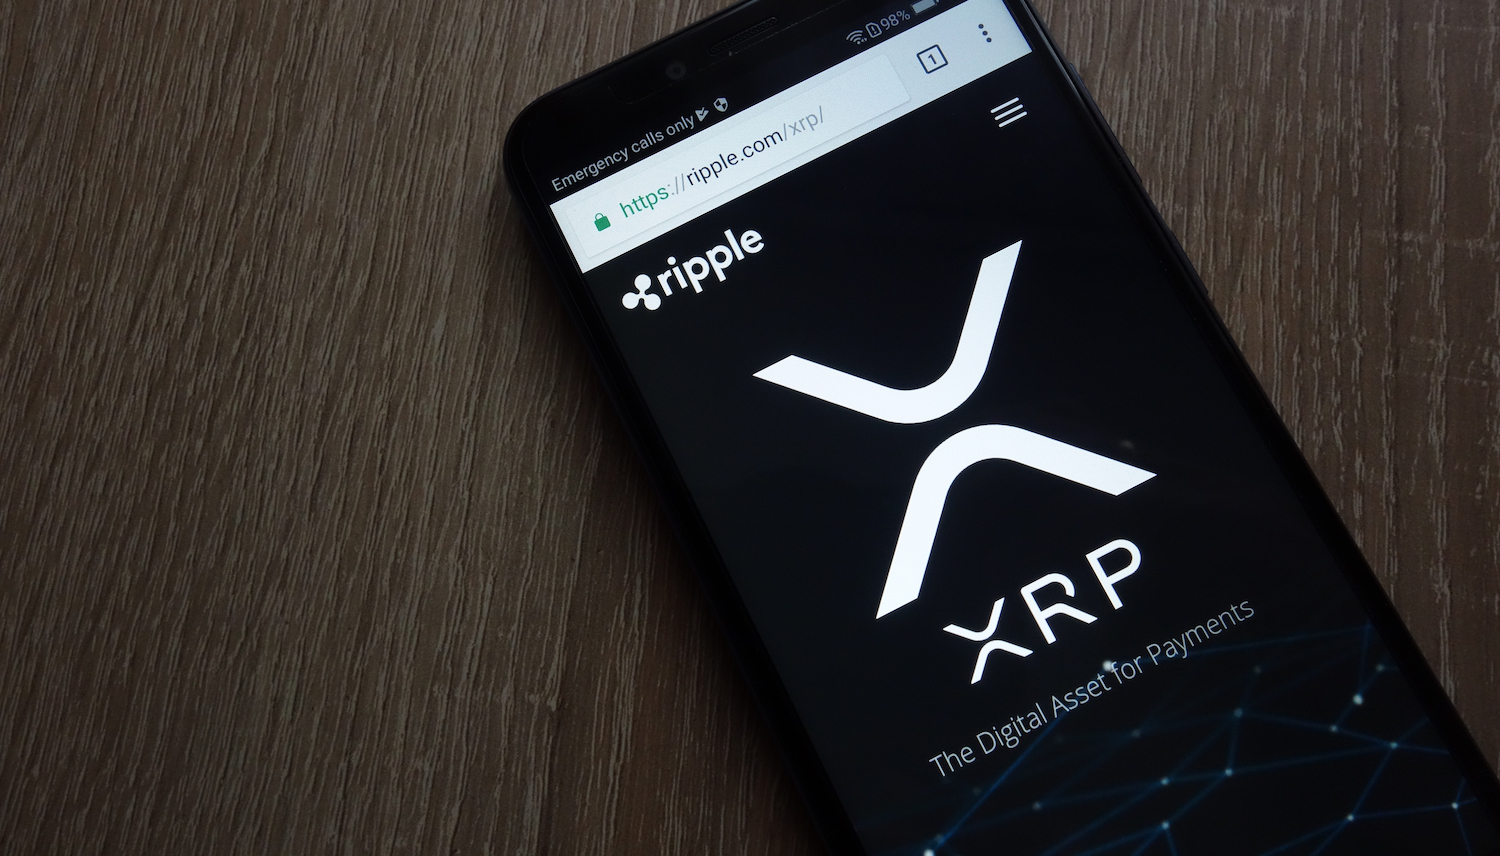 XRP Market Cap May Be Overstated By Billions, Messari Report Estimates